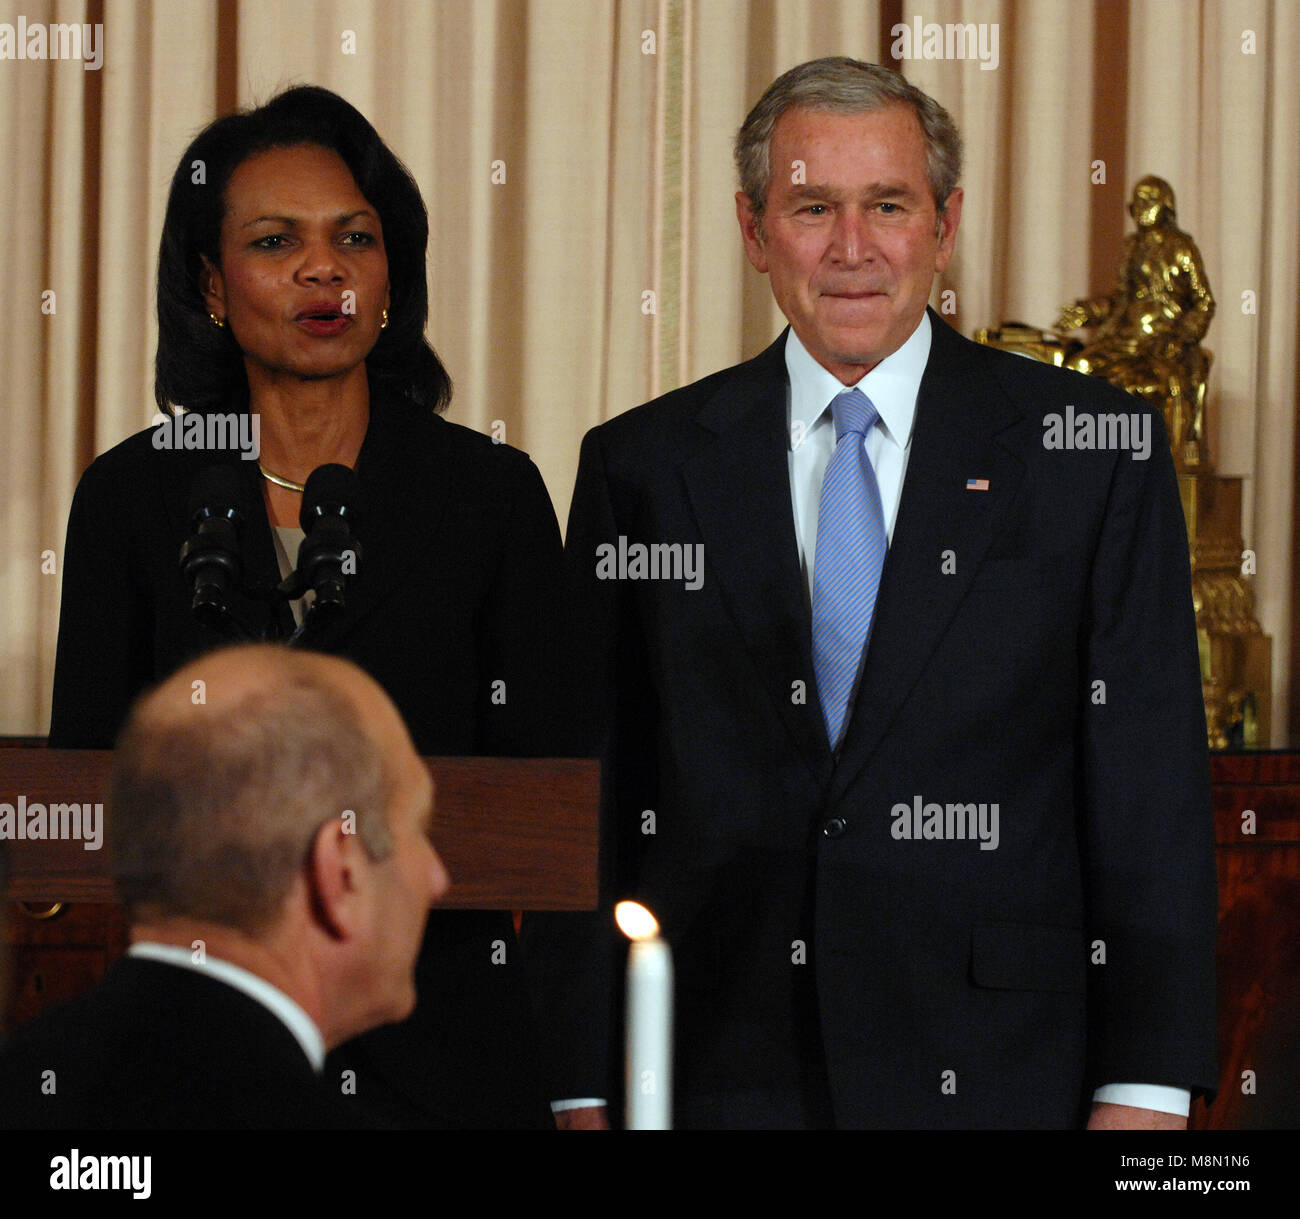 Washington, D.C. - November 26, 2007 -- United States Secretary of State Condoleezza Rice introduces United States President George W. Bush before he offers a toast during a dinner at the State Department in Washington on the eve of a Middle East peace conference on November 26, 2007. Bush is hosting Palestinian President Mahmoud Abbas (not pictured) and Israeli Prime Minister Ehud Olmert (left). .Credit: Roger L. Wollenberg - Pool via CNP /MediaPunch Stock Photo